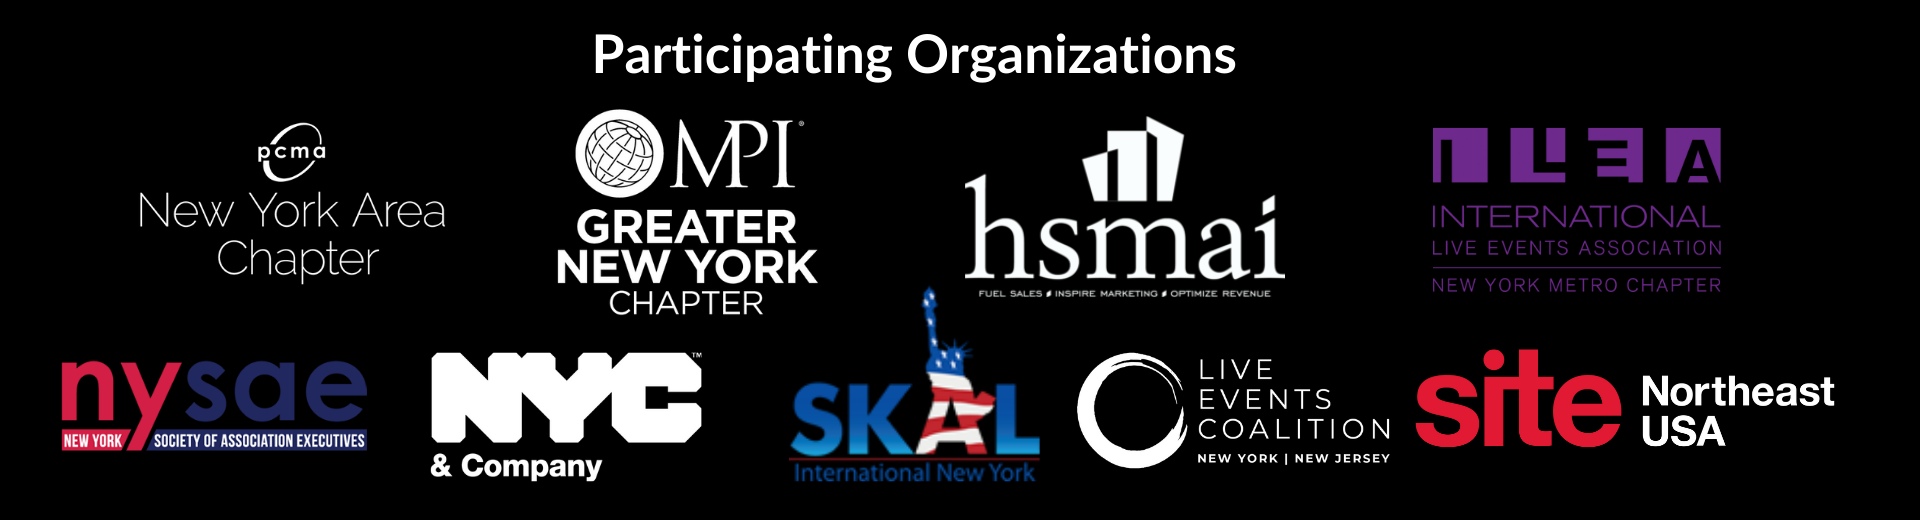 Participating Organizations - Holiday Party 1117_2